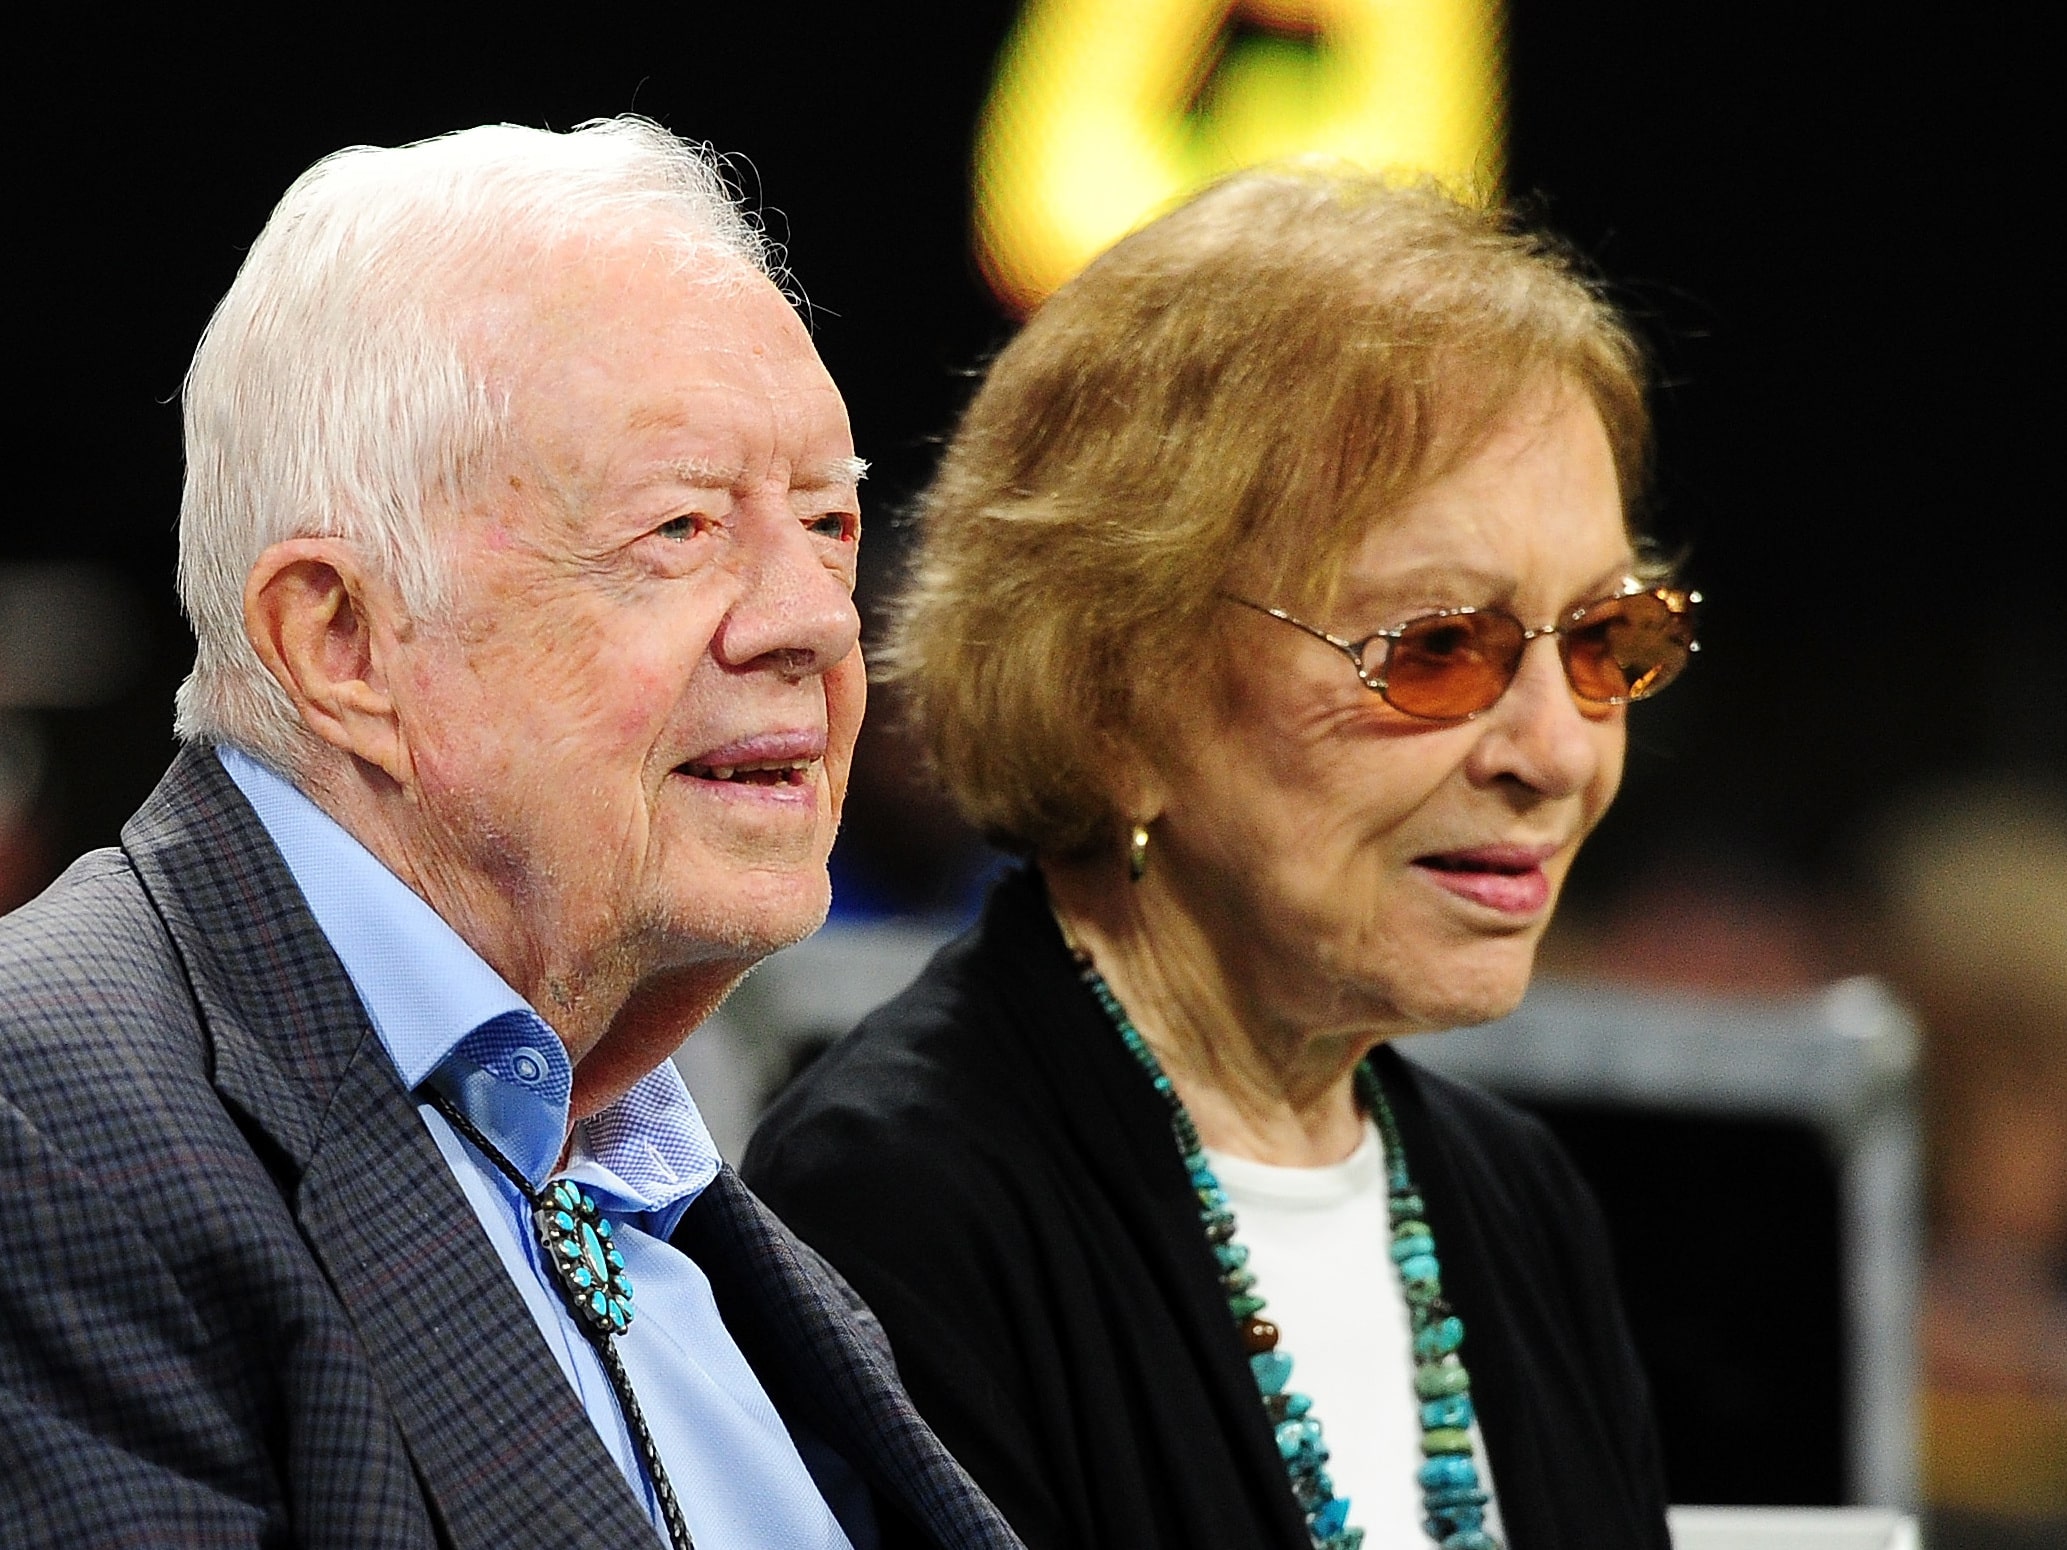 Former President Jimmy Carter lives in a modest $ 210,000 home.